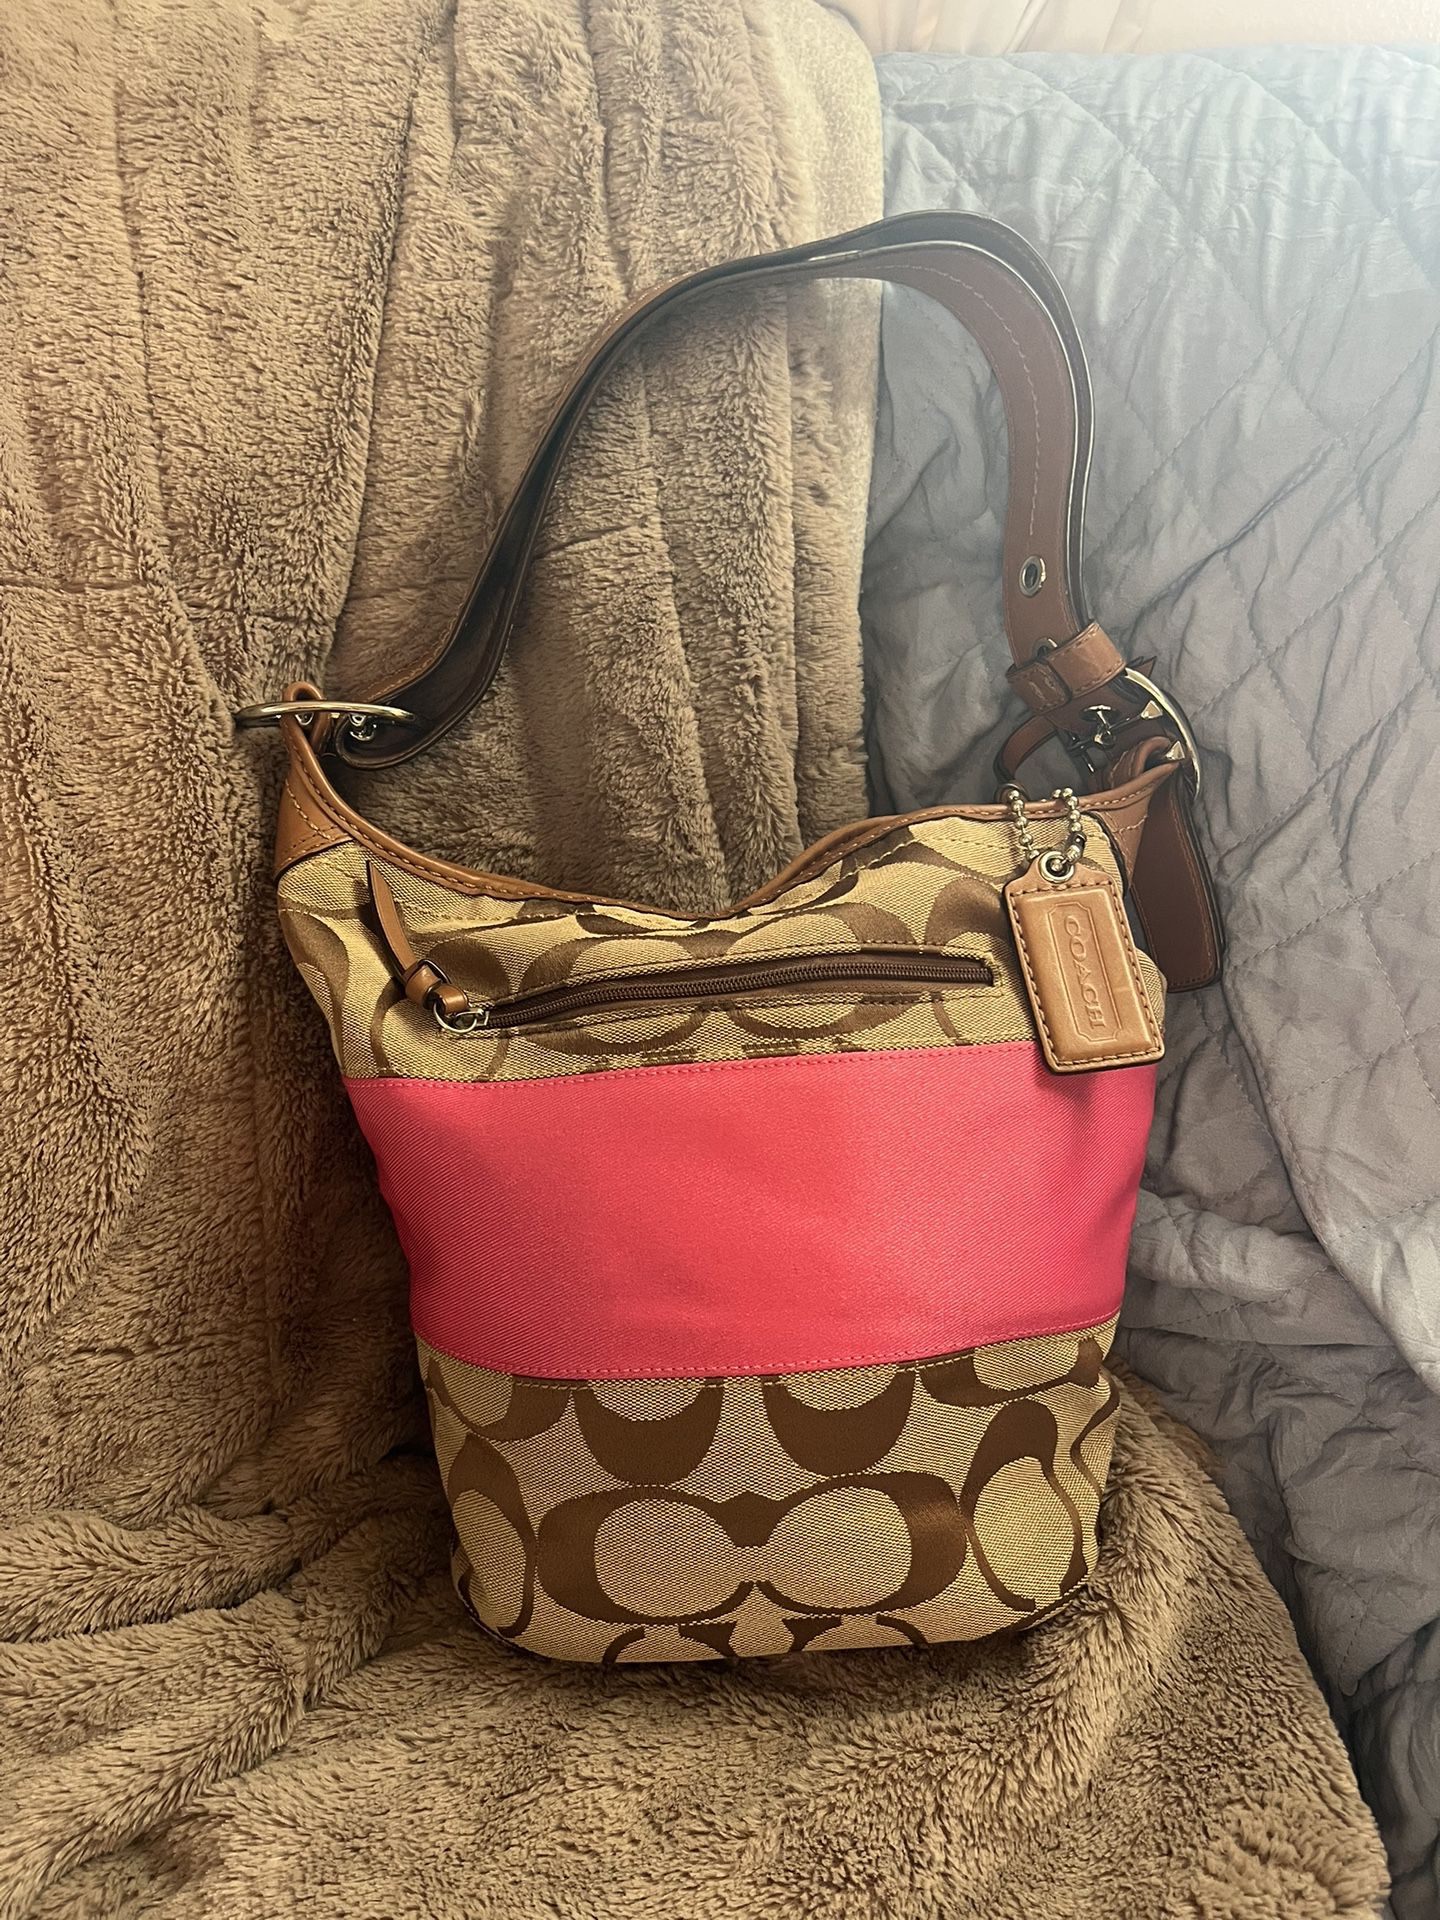 Tan And Pink Coach Purse